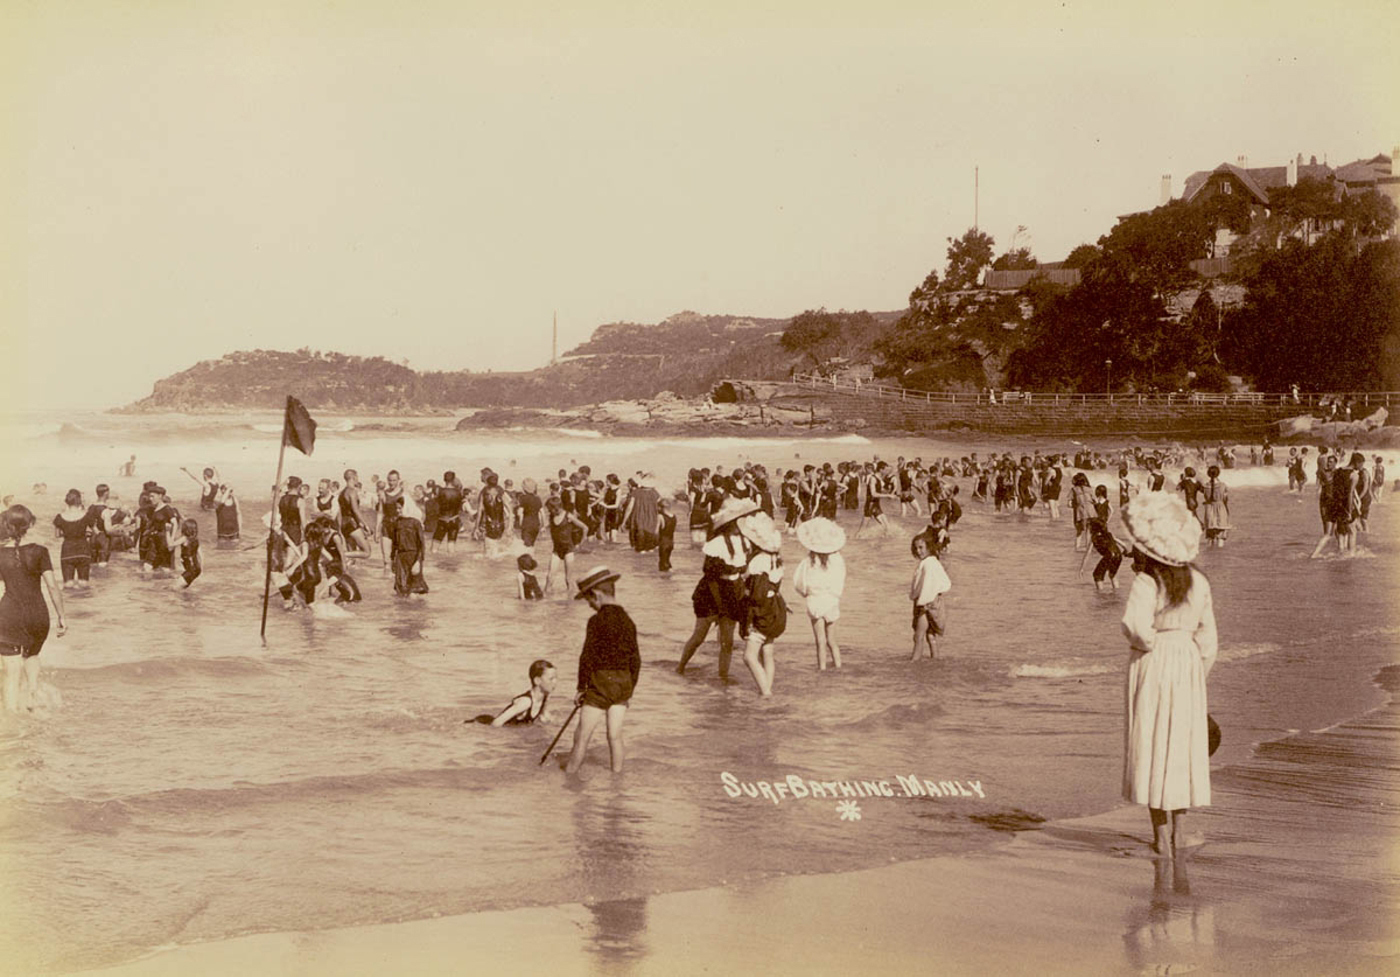 Surf bathing, Manly, between 1900 and 1910.